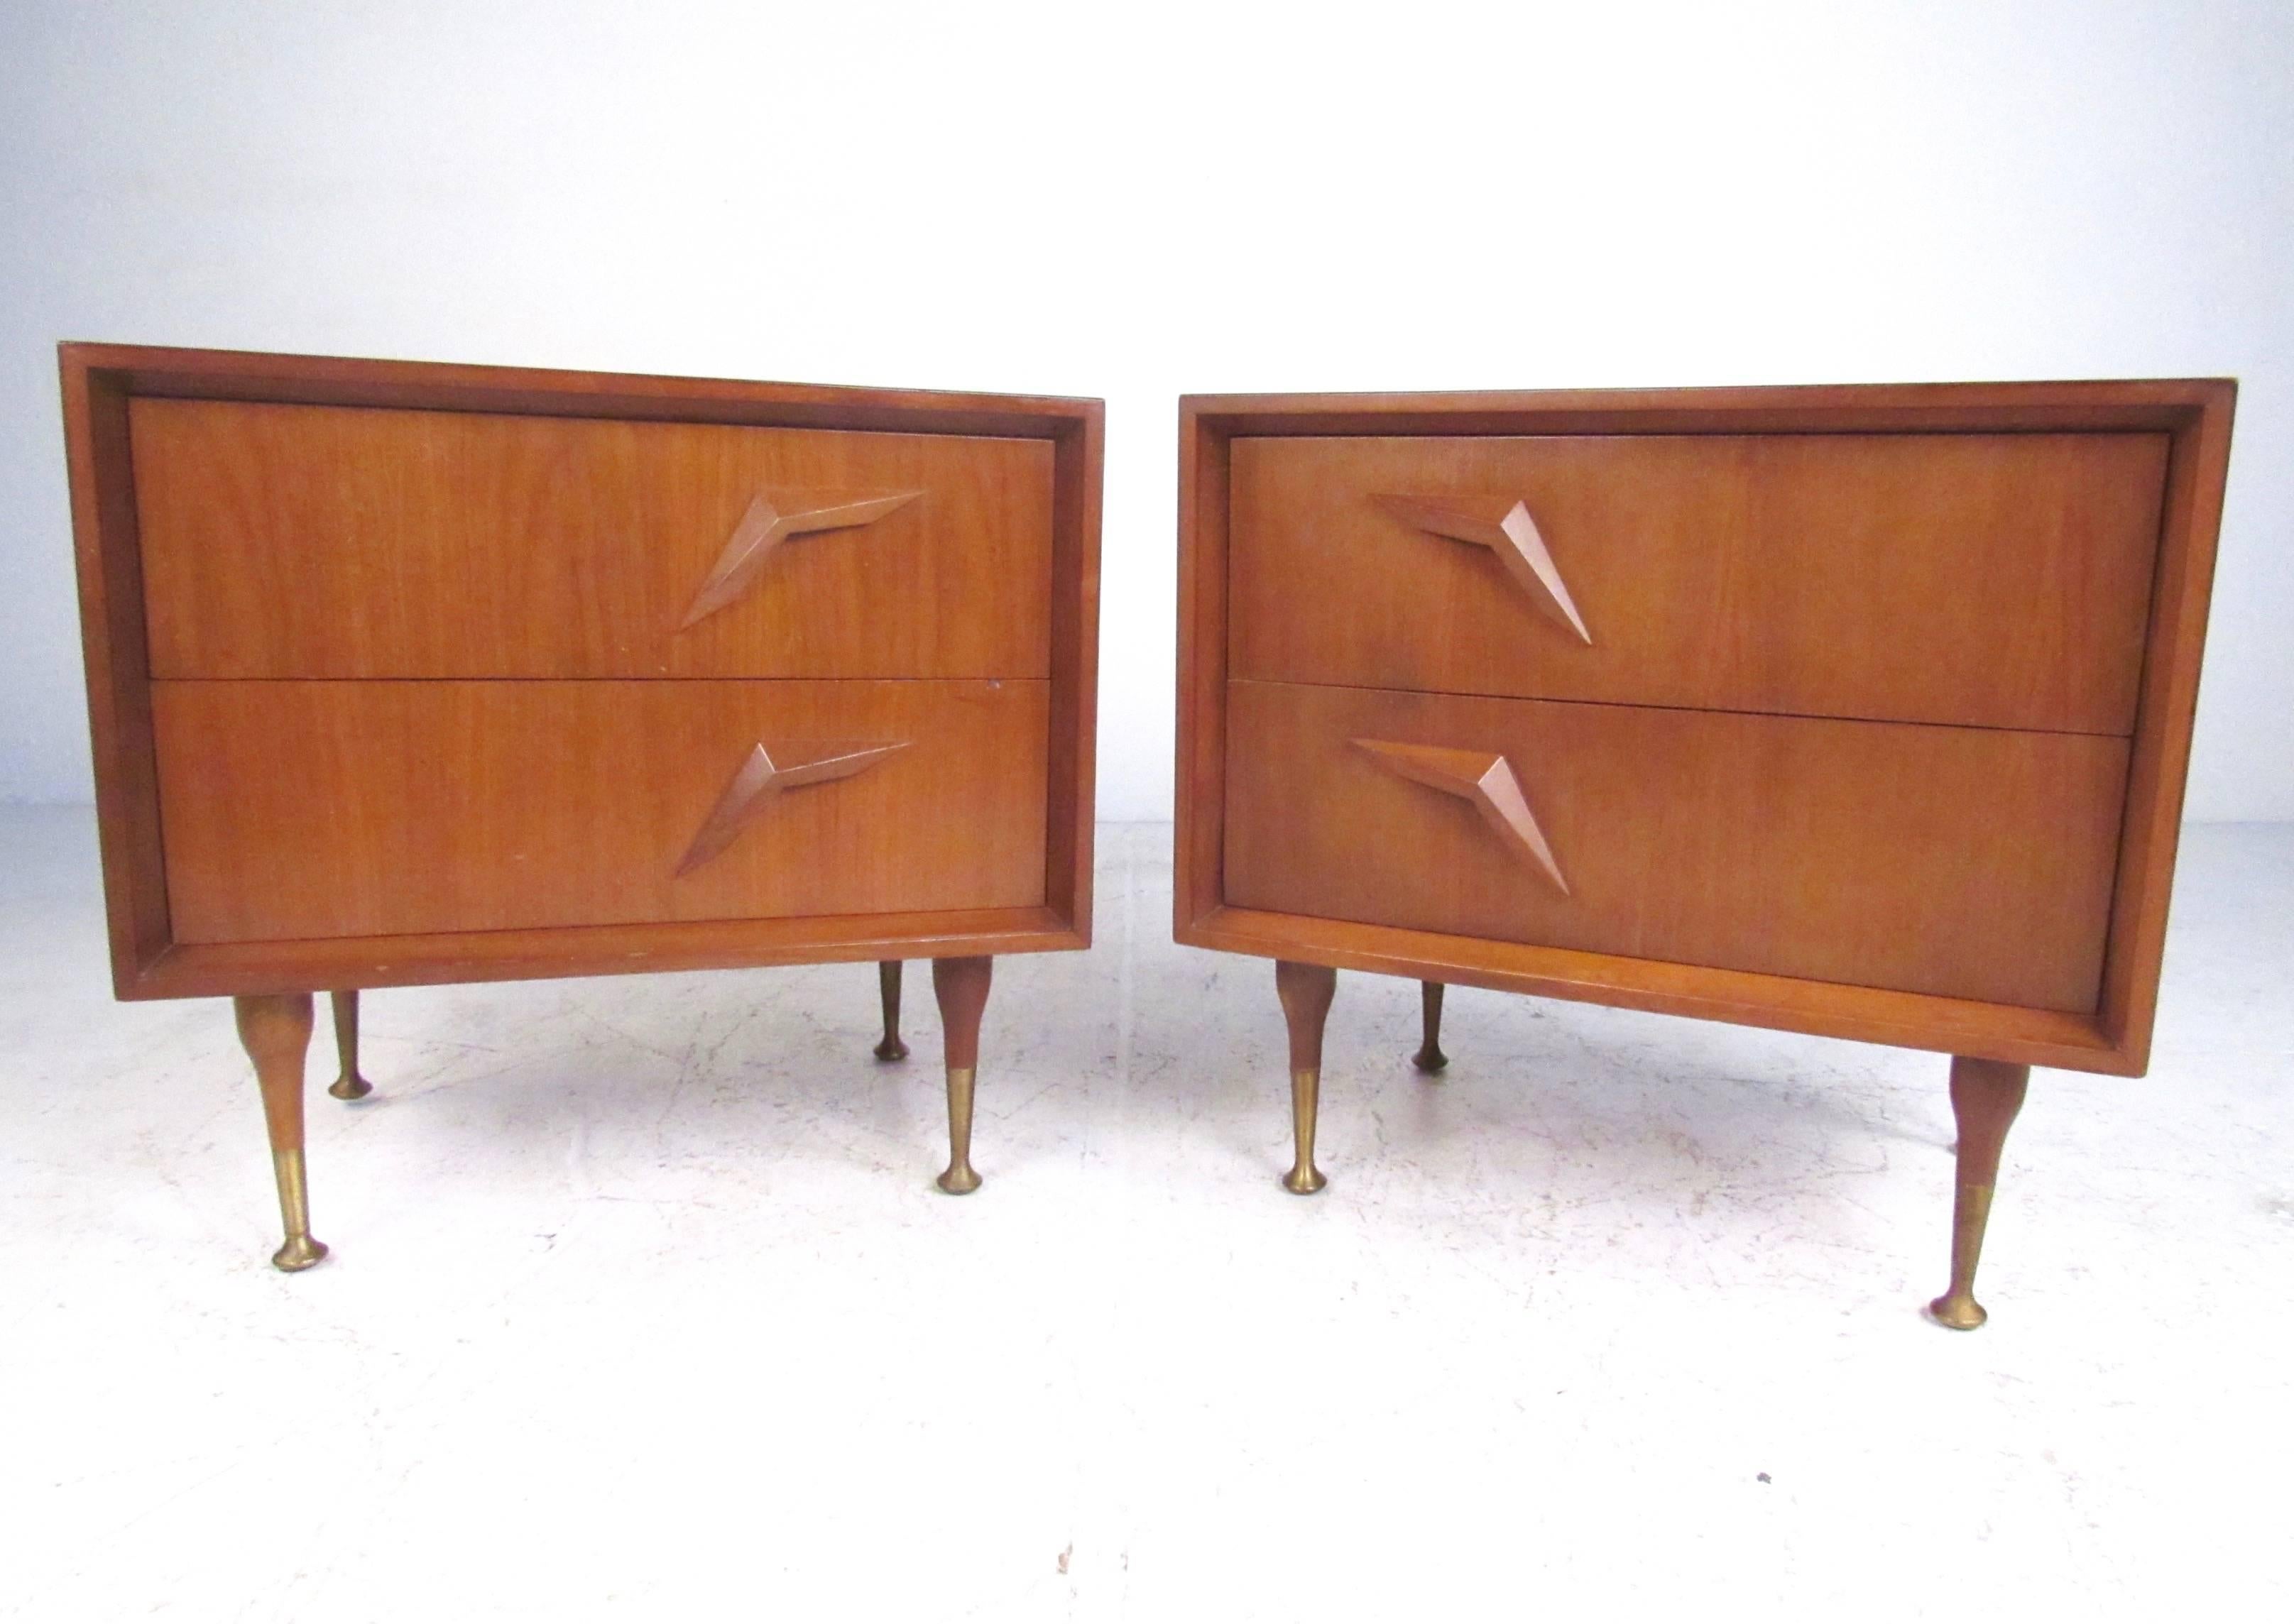 This gorgeous pair of two-drawer nightstands feature tapered legs, brass sabots, and unique sculpted drawer pulls. The stylish Mid-Century Modern appeal of this matching pair of end tables makes them an impressive addition to any bedroom. Matching